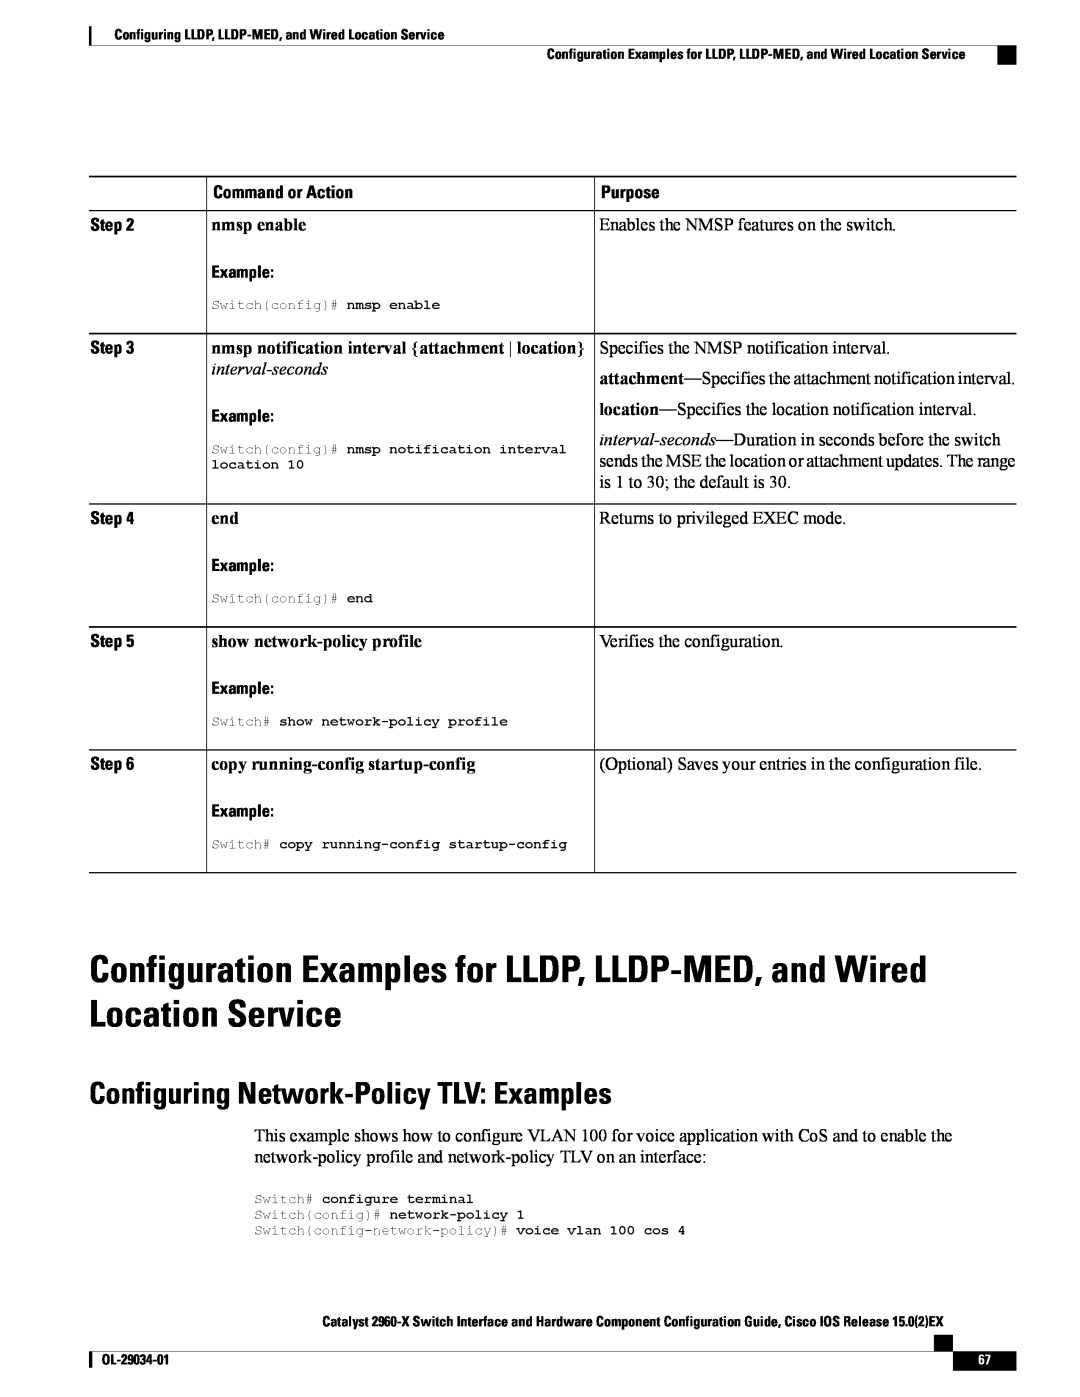 Cisco Systems WSC2960X48TDL Configuration Examples for LLDP, LLDP-MED, and Wired Location Service, nmsp enable, Purpose 